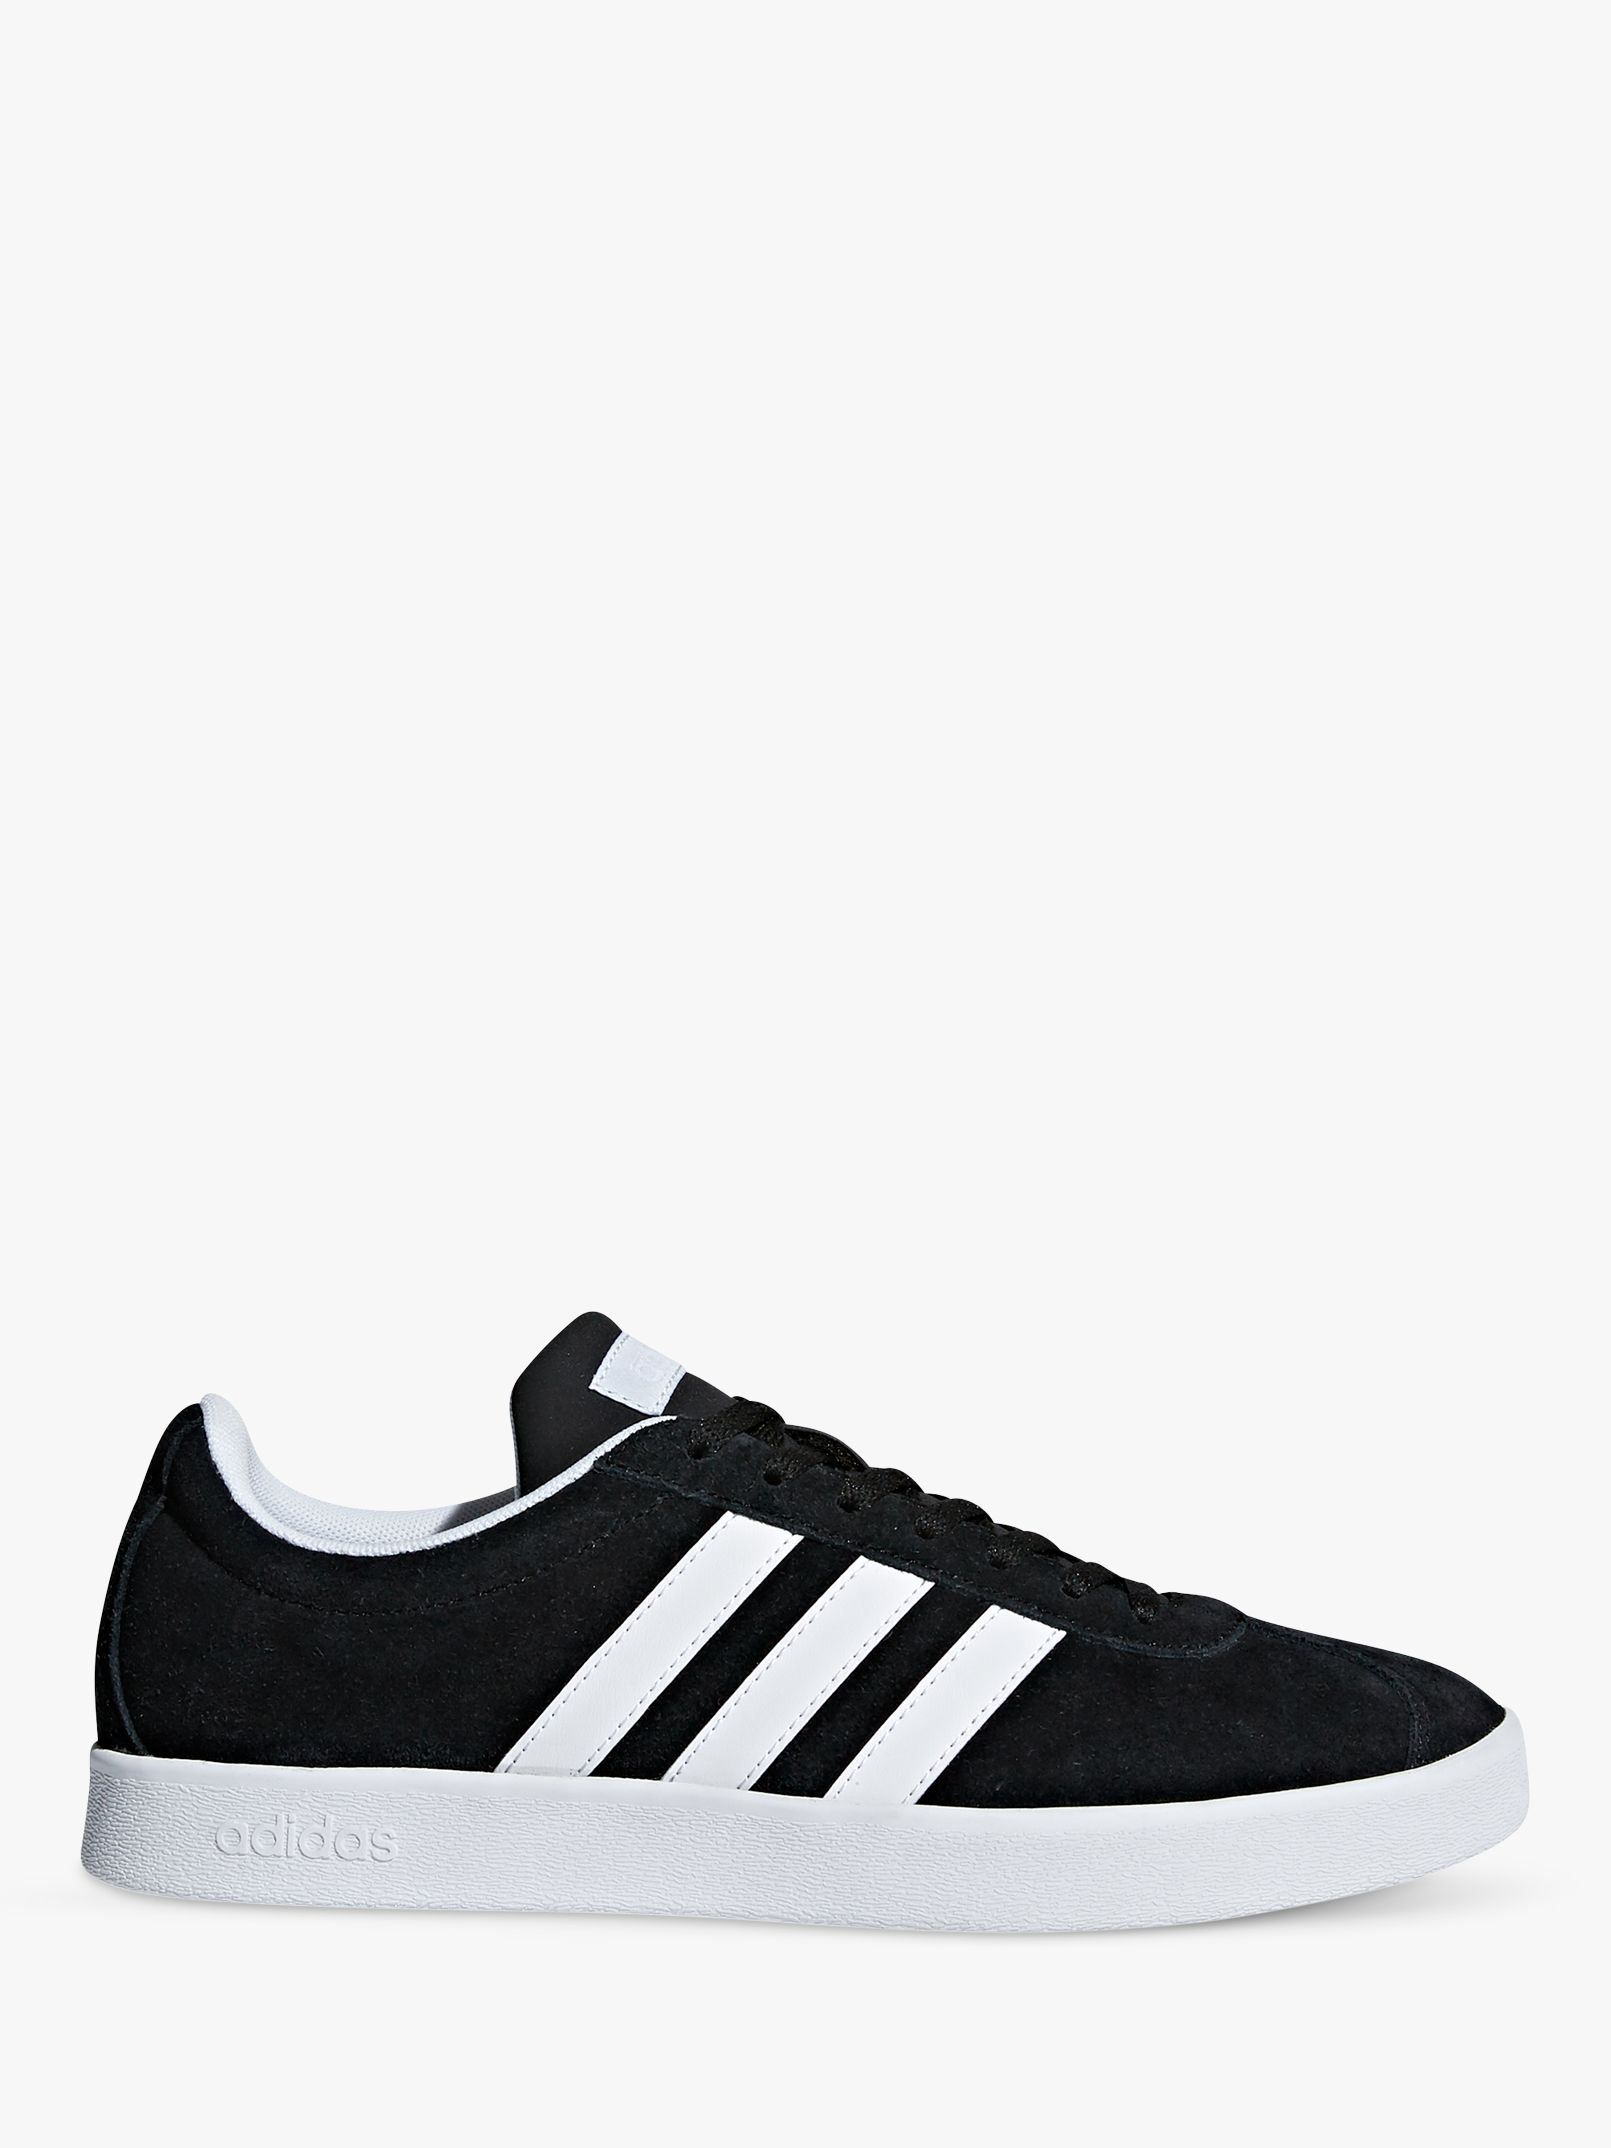 women's all black adidas trainers